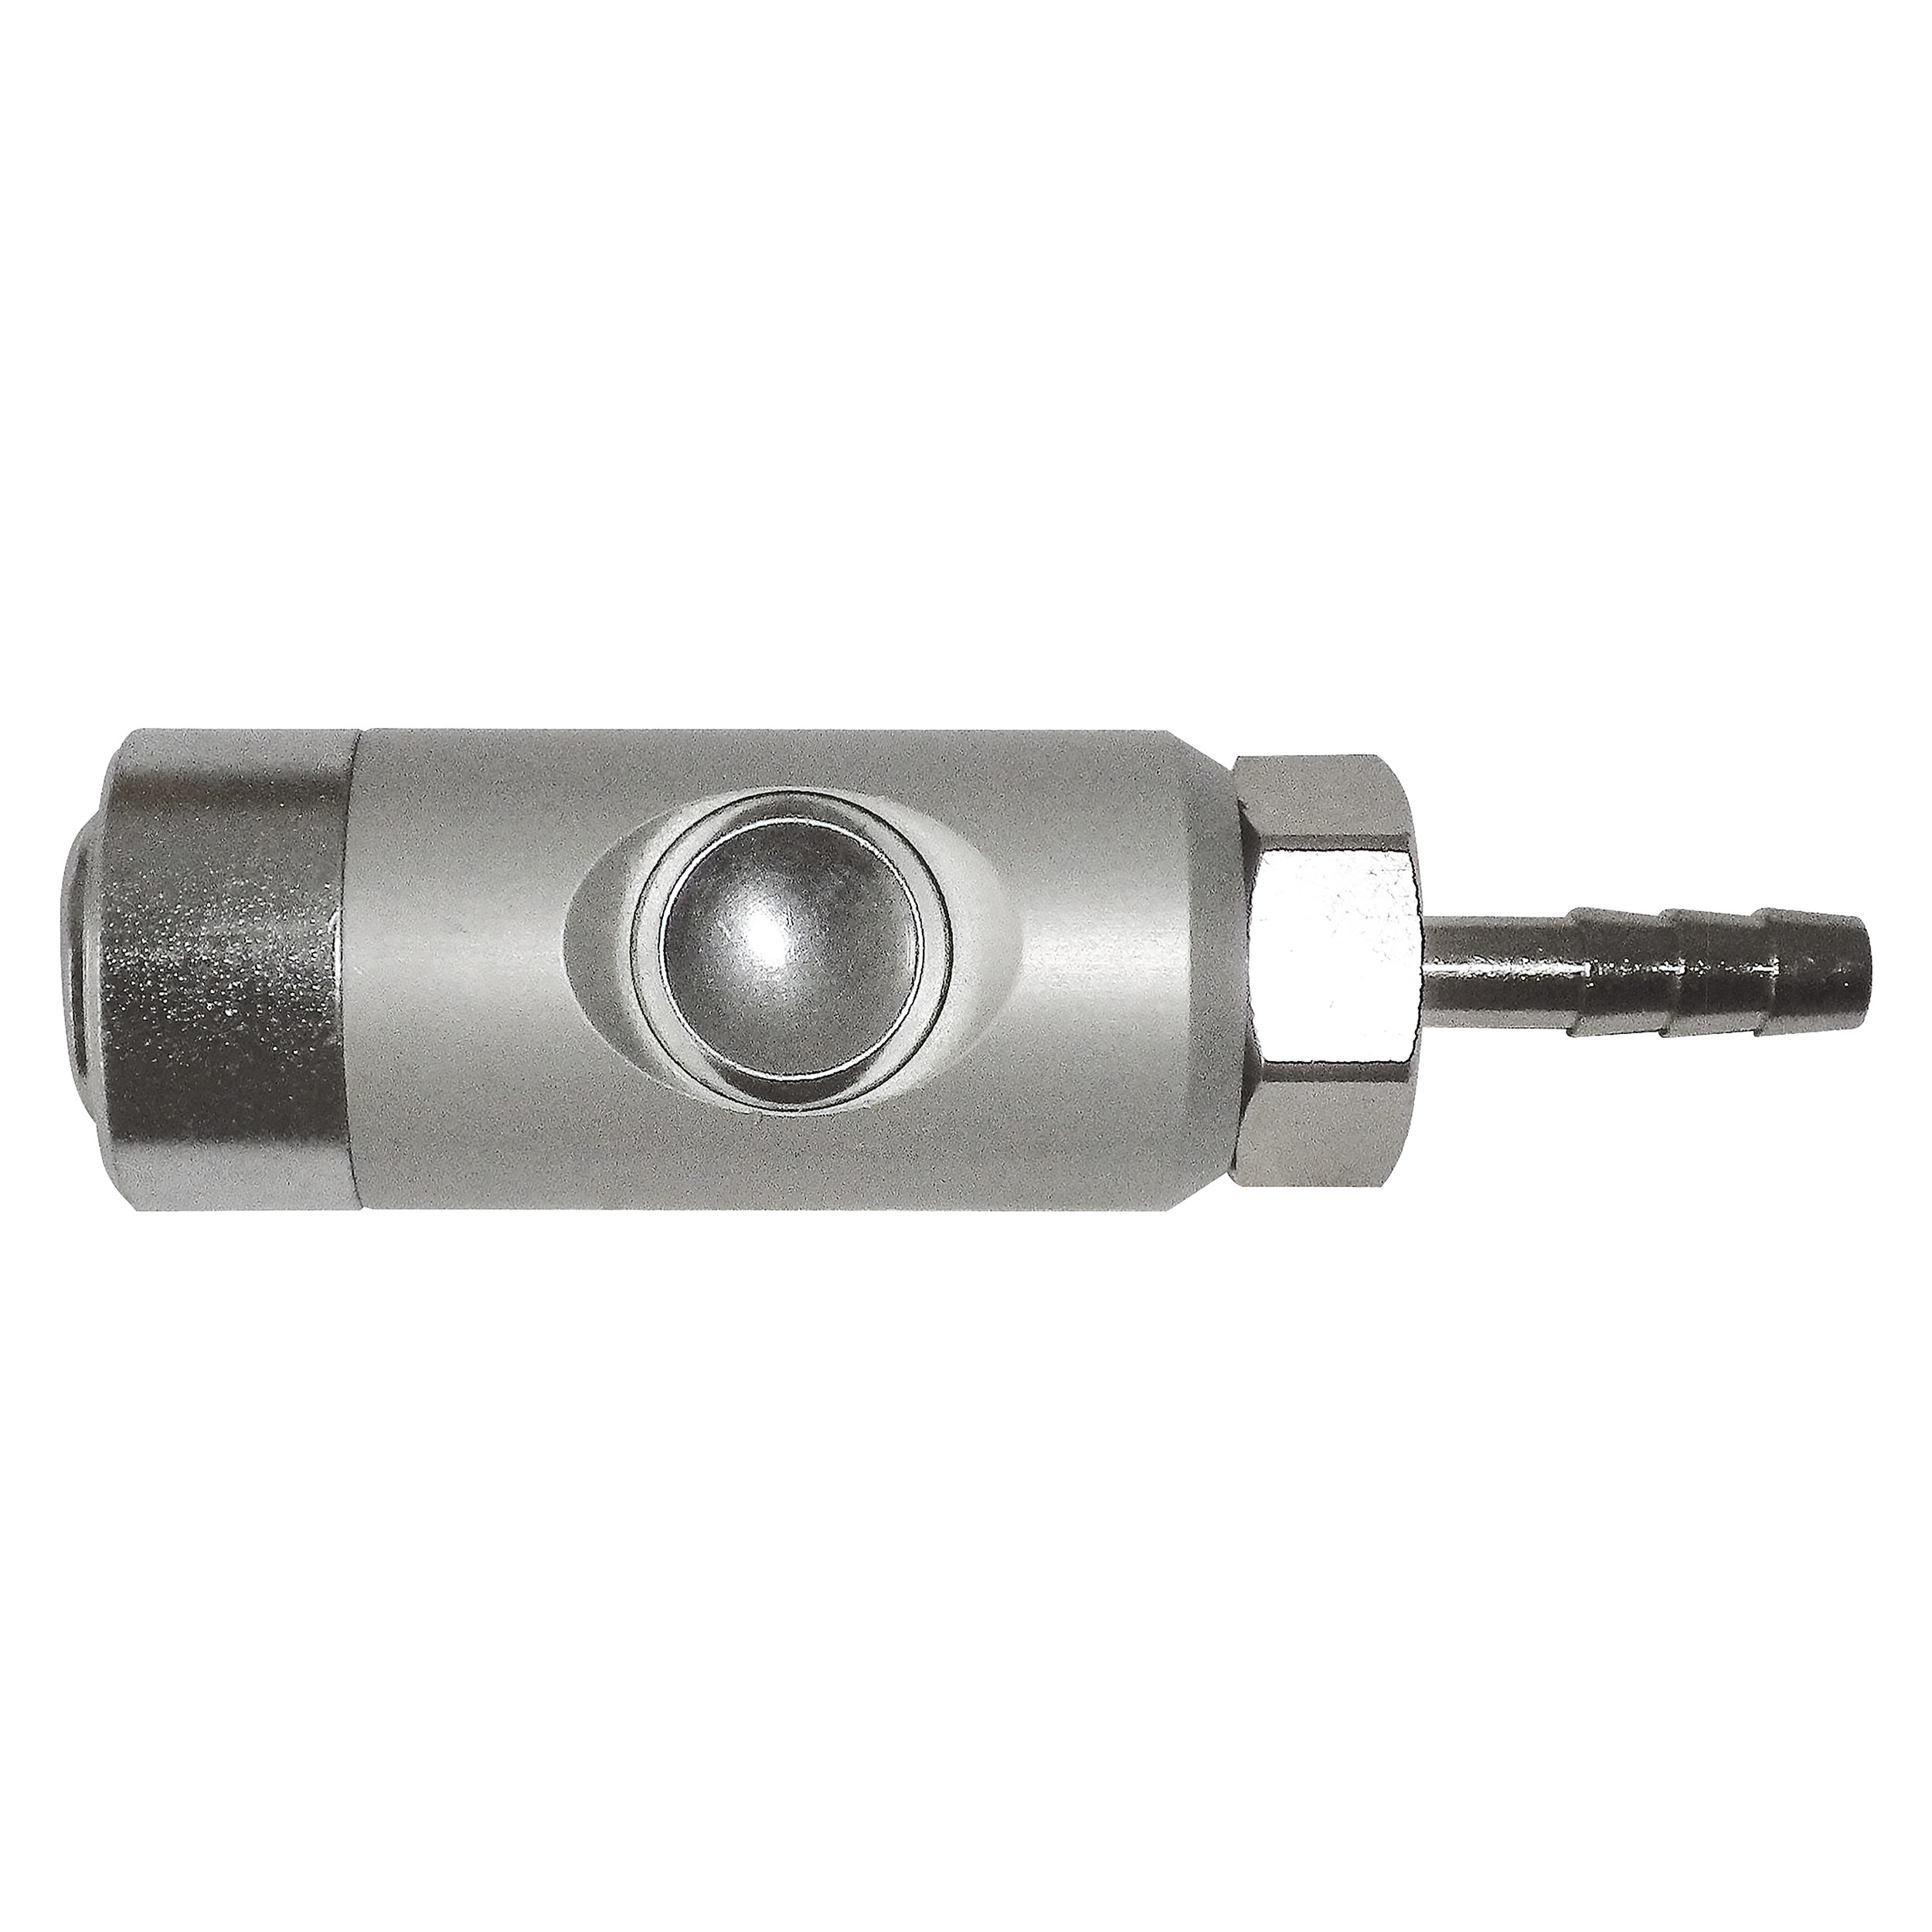 DN 5.5 safety coupling w. ARO profile, w. push button, QN: 1,000 Nl/min, MOP: 145 psi, hose nozzle DN 9, length: 88.5 mm, AF 21